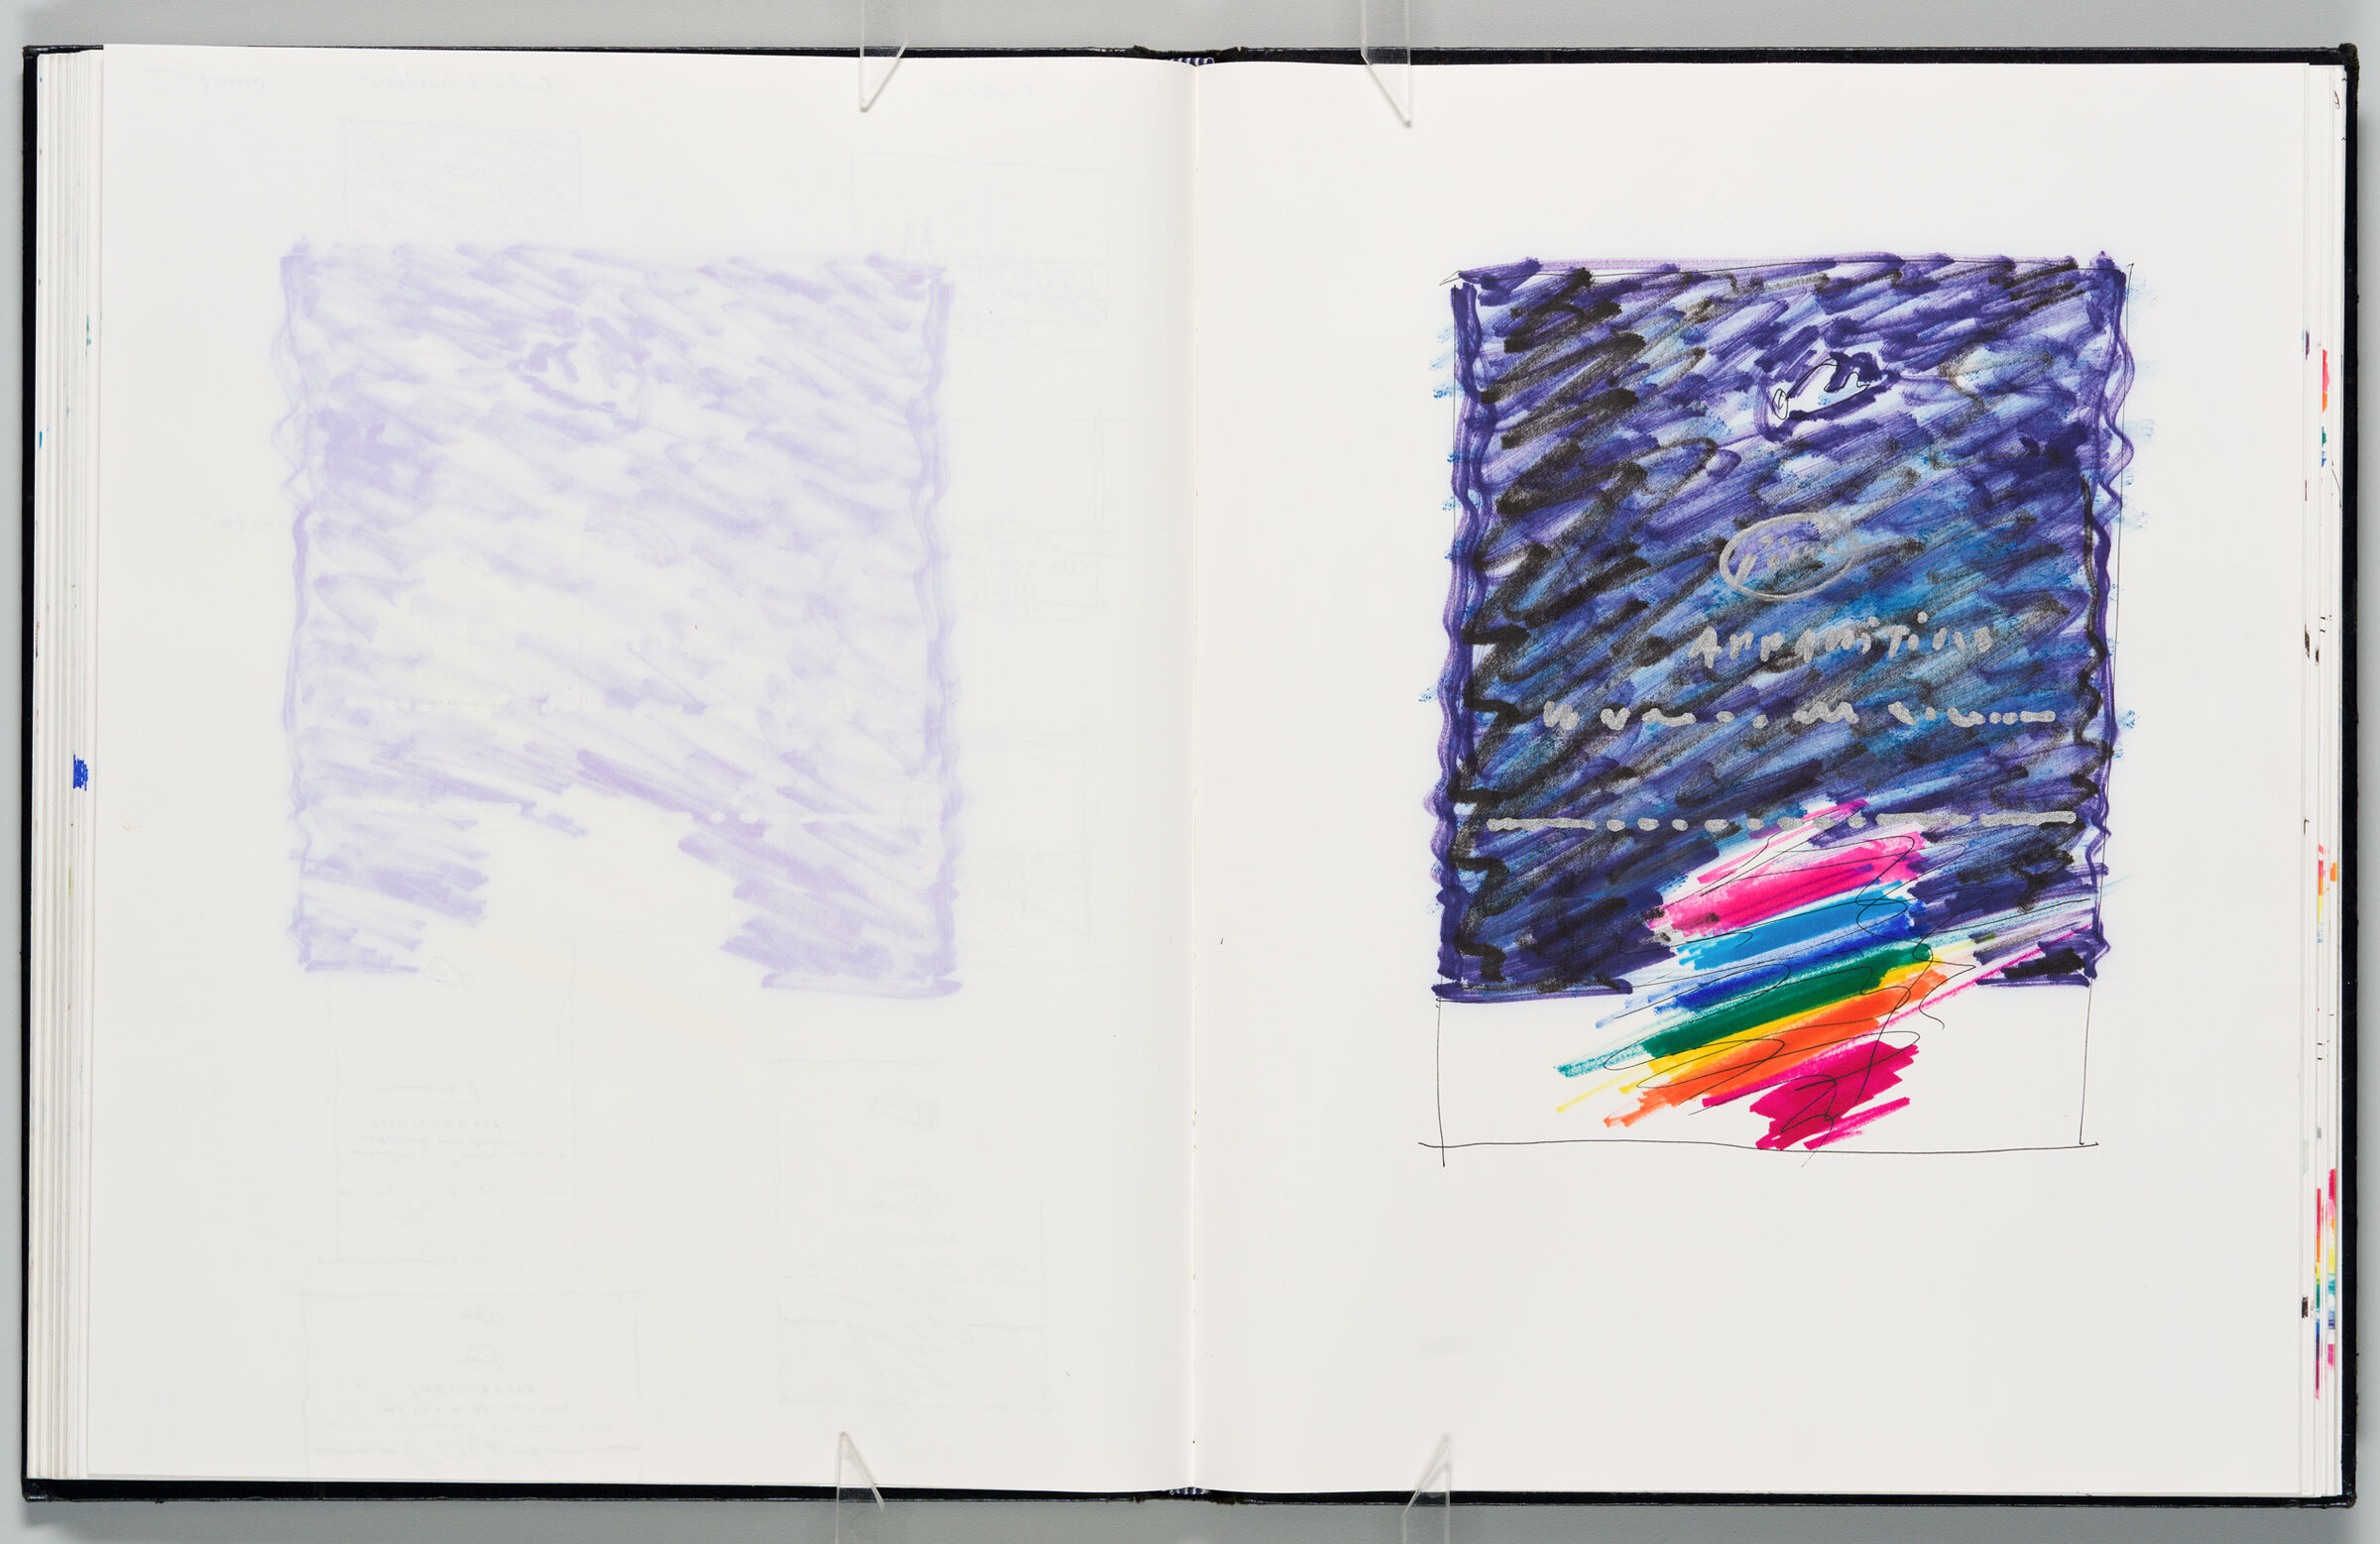 Untitled (Blank With Color Transfer, Left Page); Untitled (Galerie Schoeller Poster Design, Right Page)